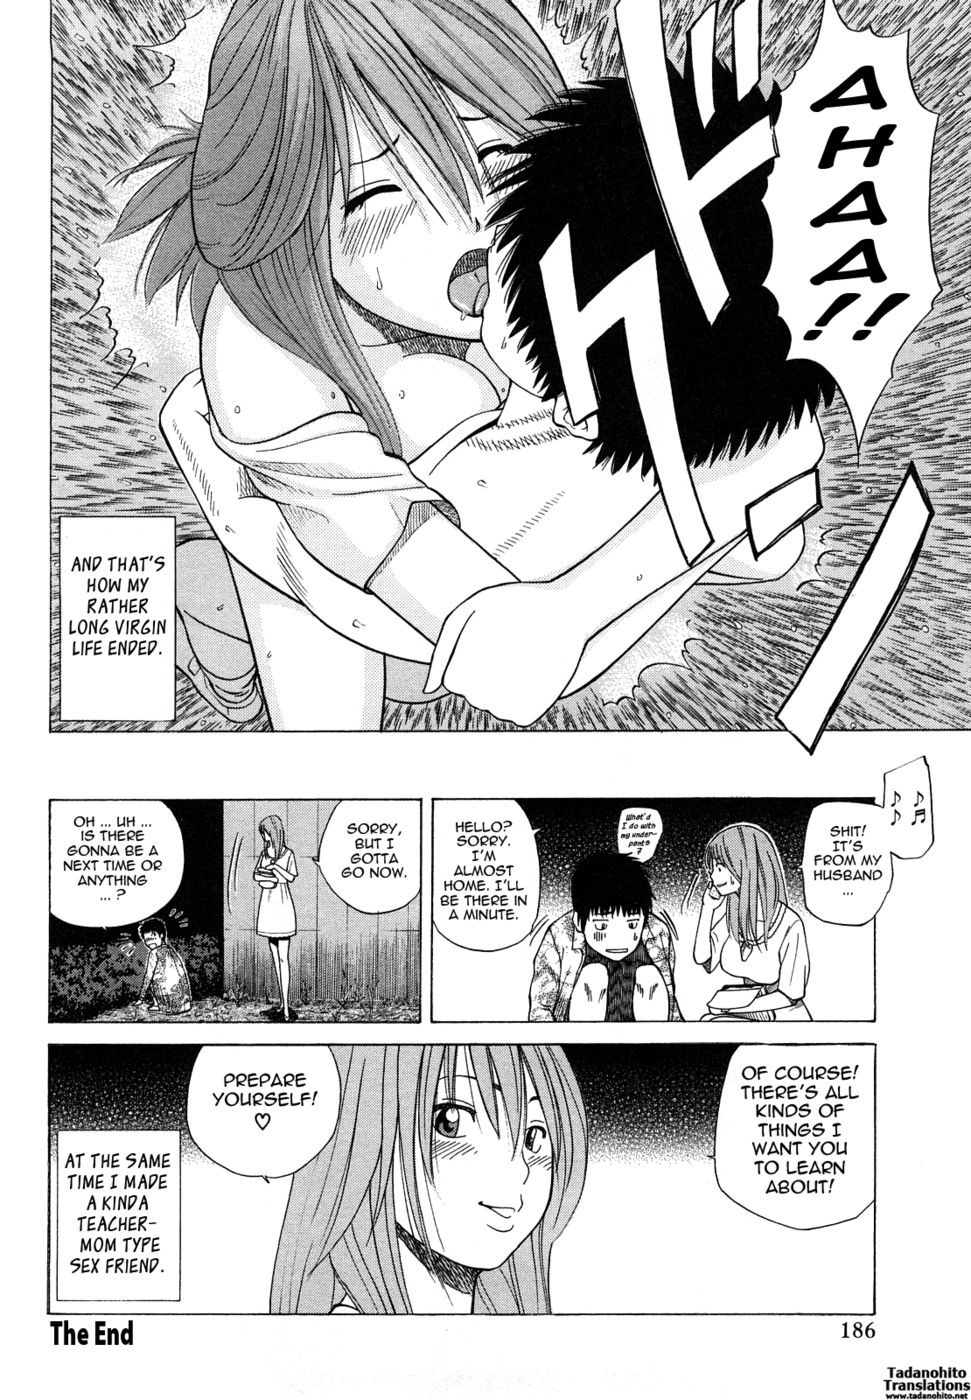 Young Wife and High School Girl Collection-Chapter 10-Virgin Boy Complex-Hentai Manga Hentai Comic